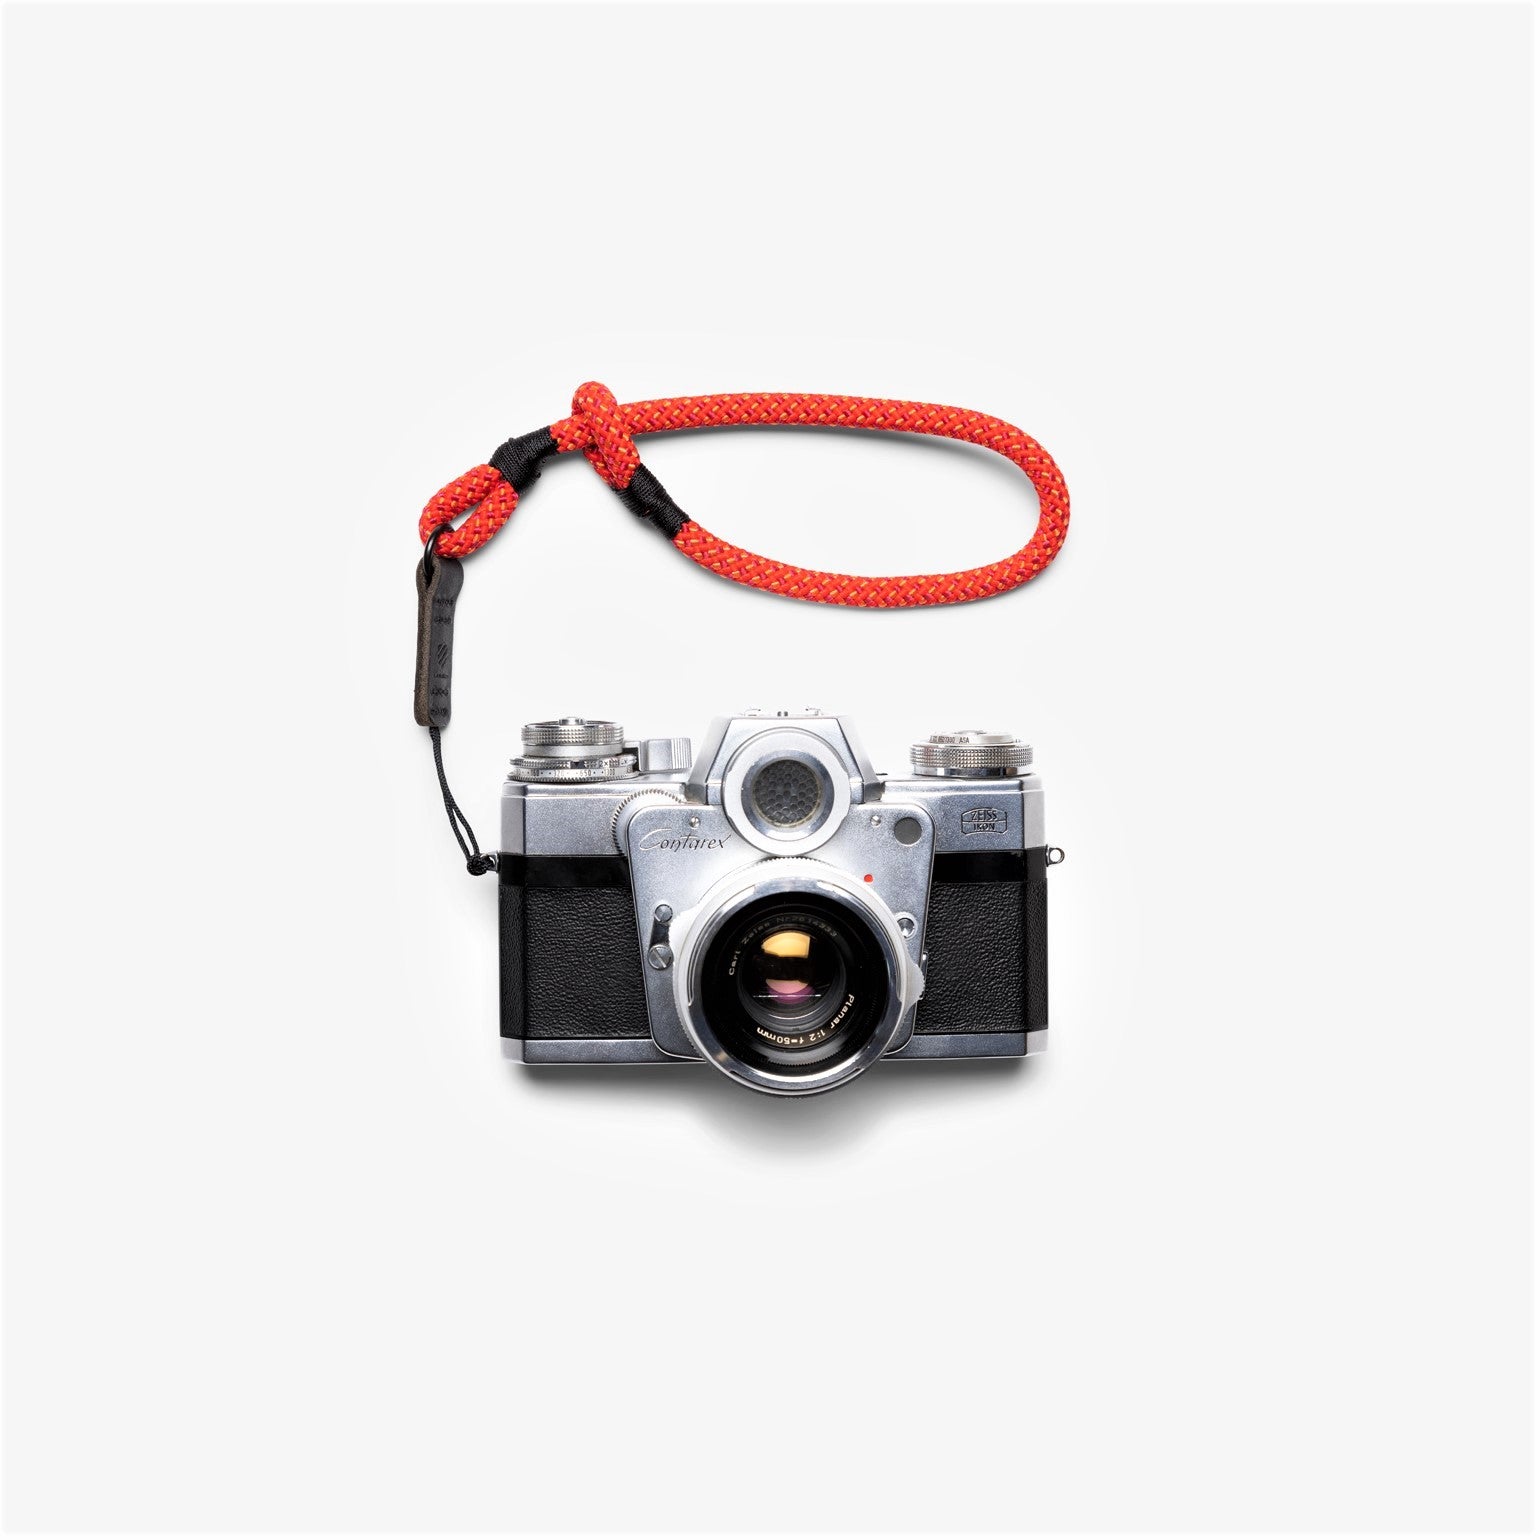 Langly Camera and Phone Wrist Strap (Red) with Attached Camera - Not Included